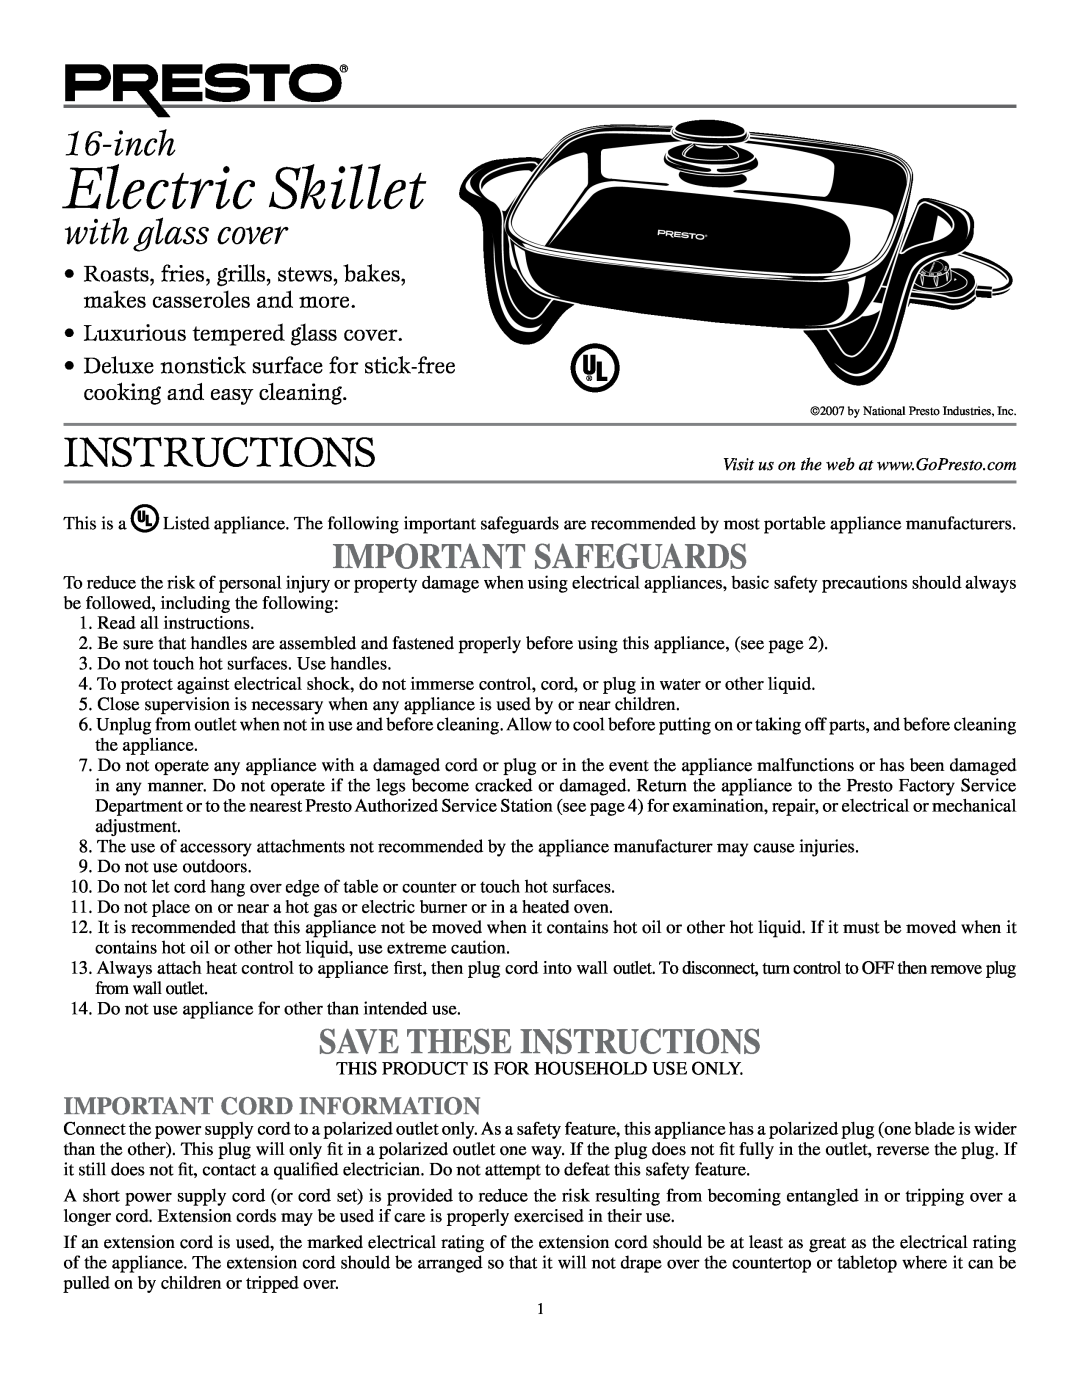 Presto 16-inch Electric Skillet manual Important Cord Information, Instructions, with glass cover, Important Safeguards 